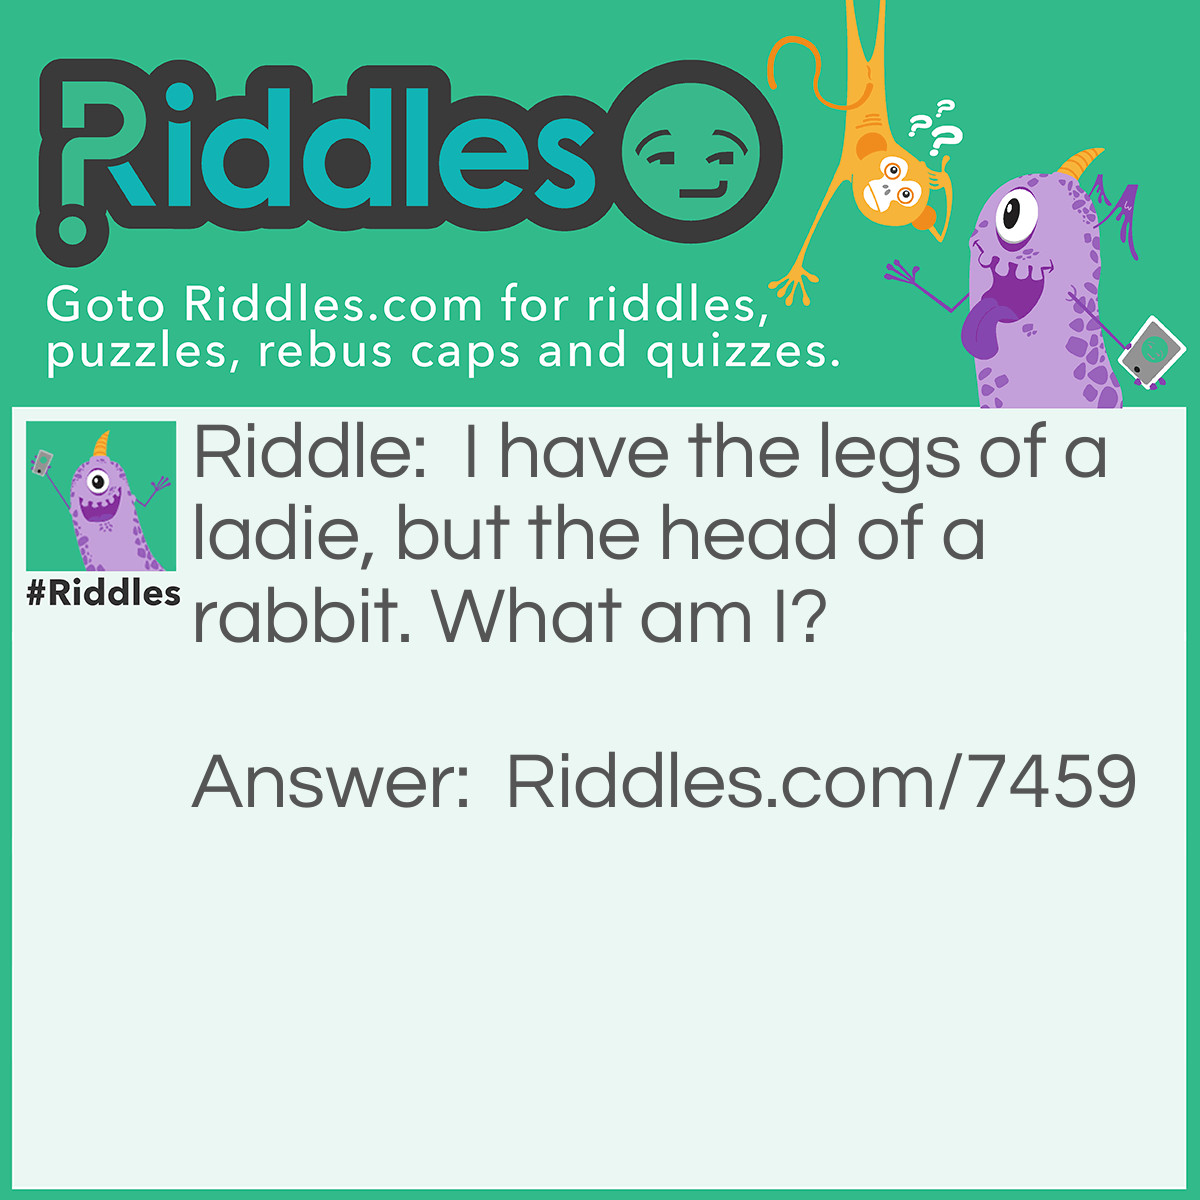 Riddle: I have the legs of a ladie, but the head of a rabbit. What am I? Answer: A human-rabbit hybrid.